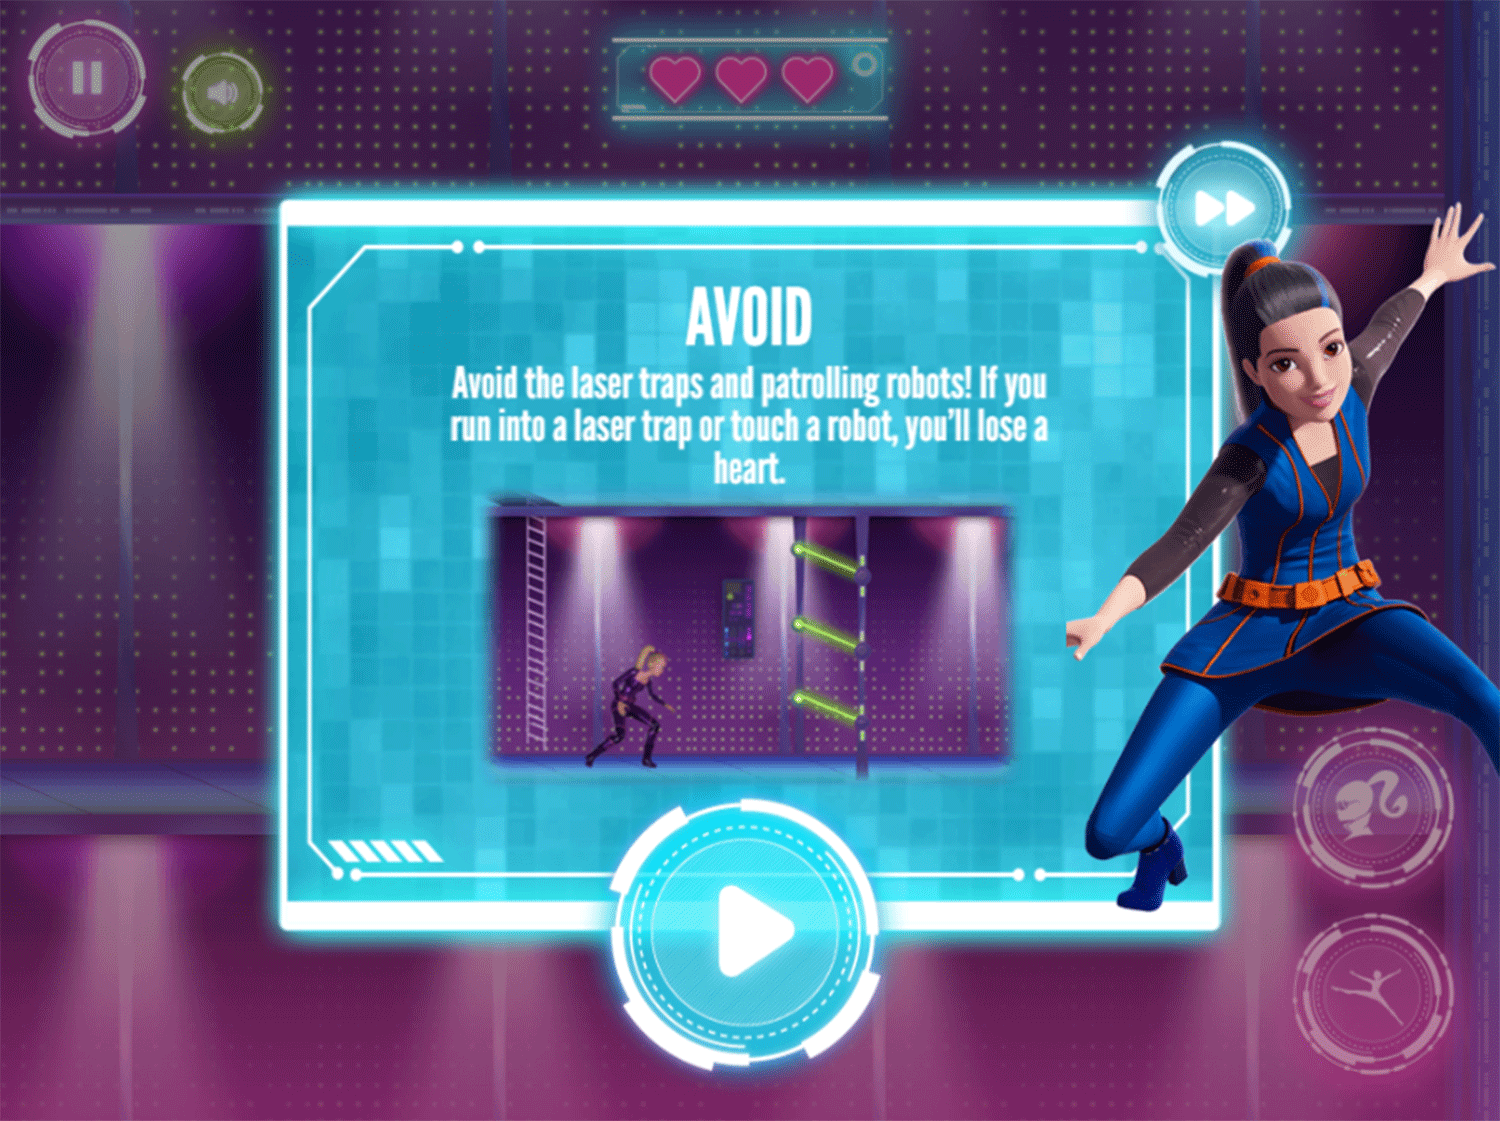 Barbie Spy Squad Academy Game Laser Sneaking Instructions Screenshot.